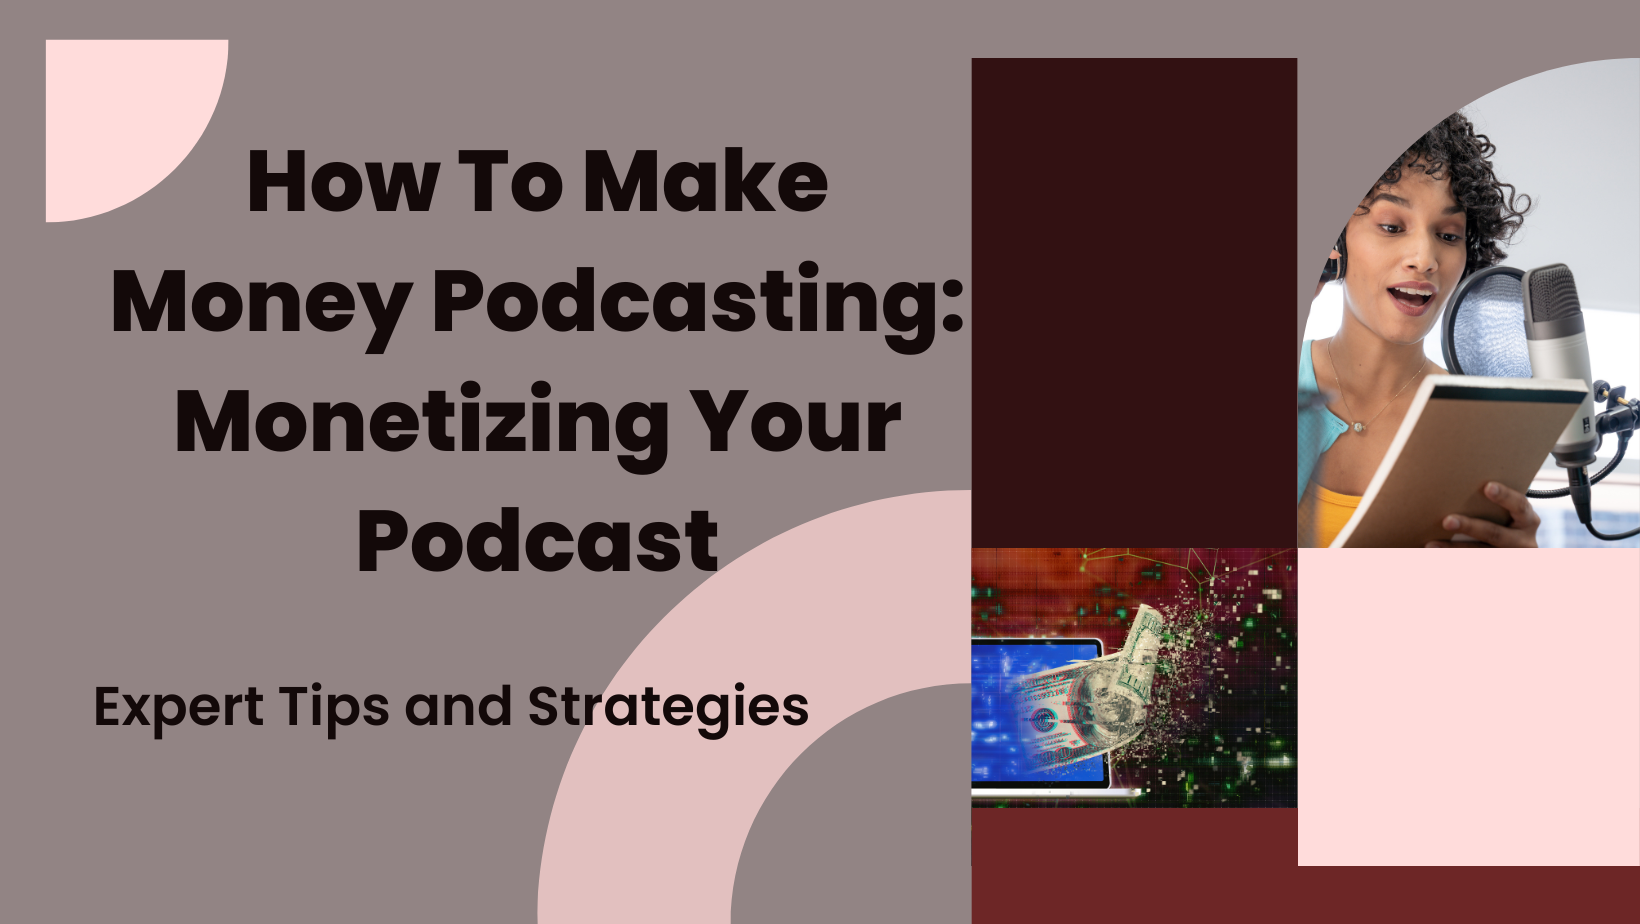 How To Make Money Podcasting Monetizing Your Podcast